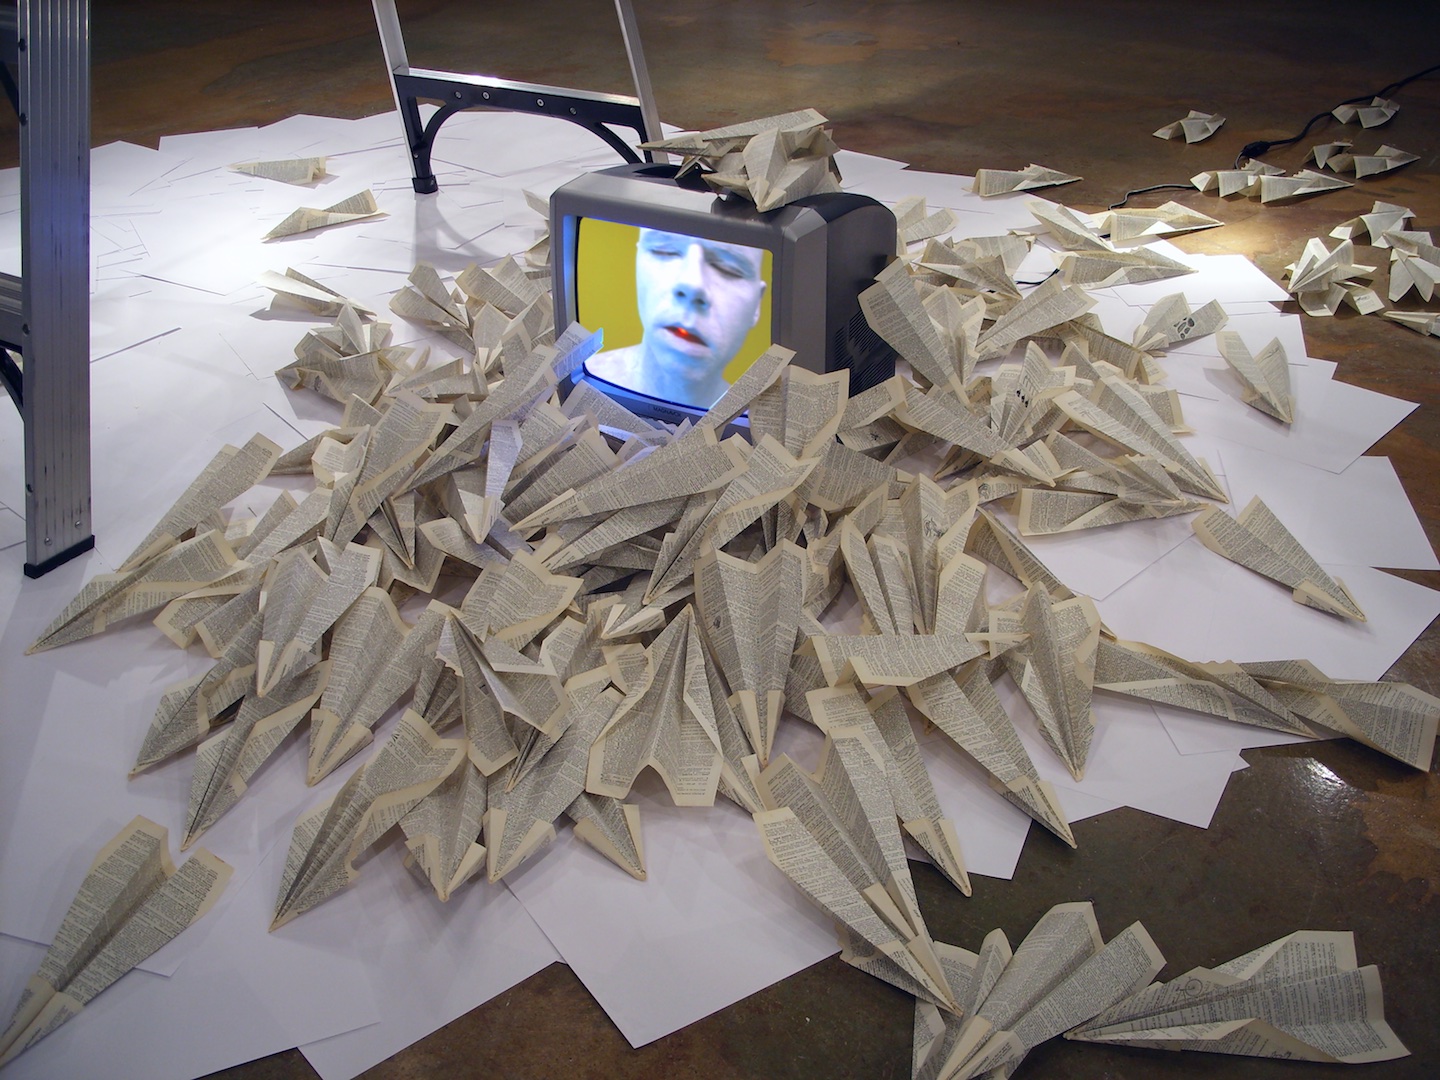     Homonymous Confusion of Planes , 2007  Performance Art  